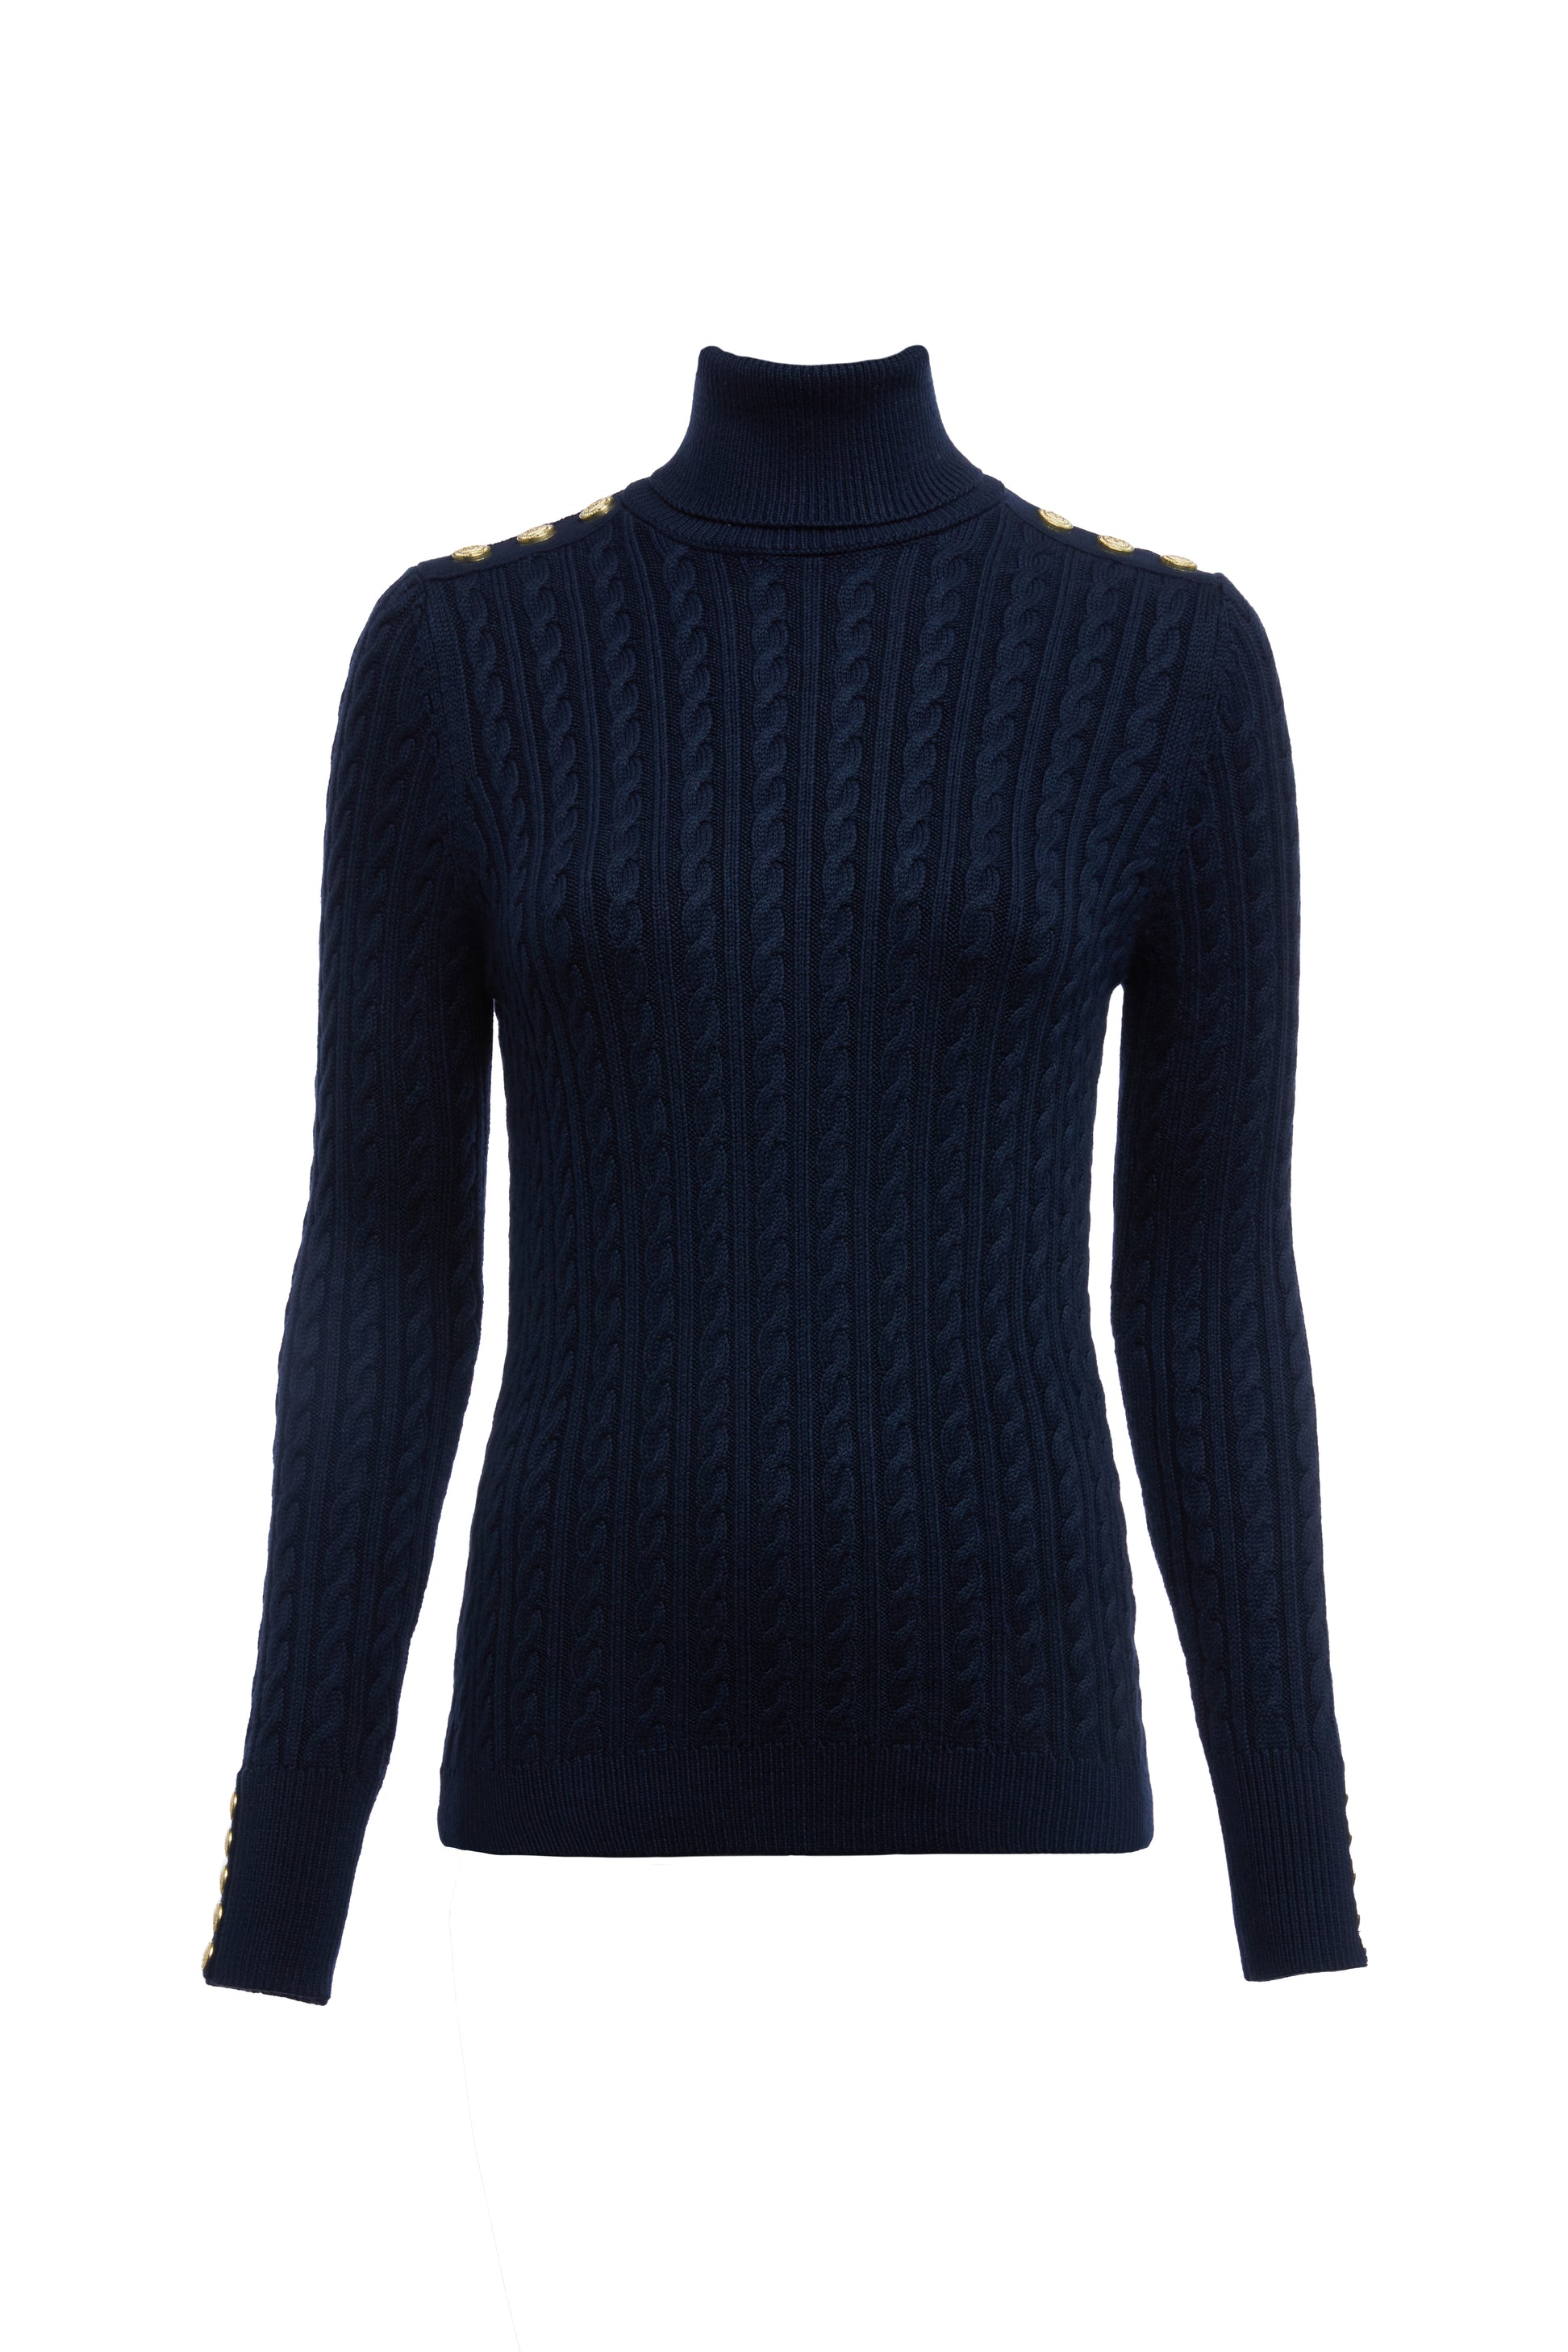 Seattle Roll Neck Cable Knit (Ink Navy) – Holland Cooper